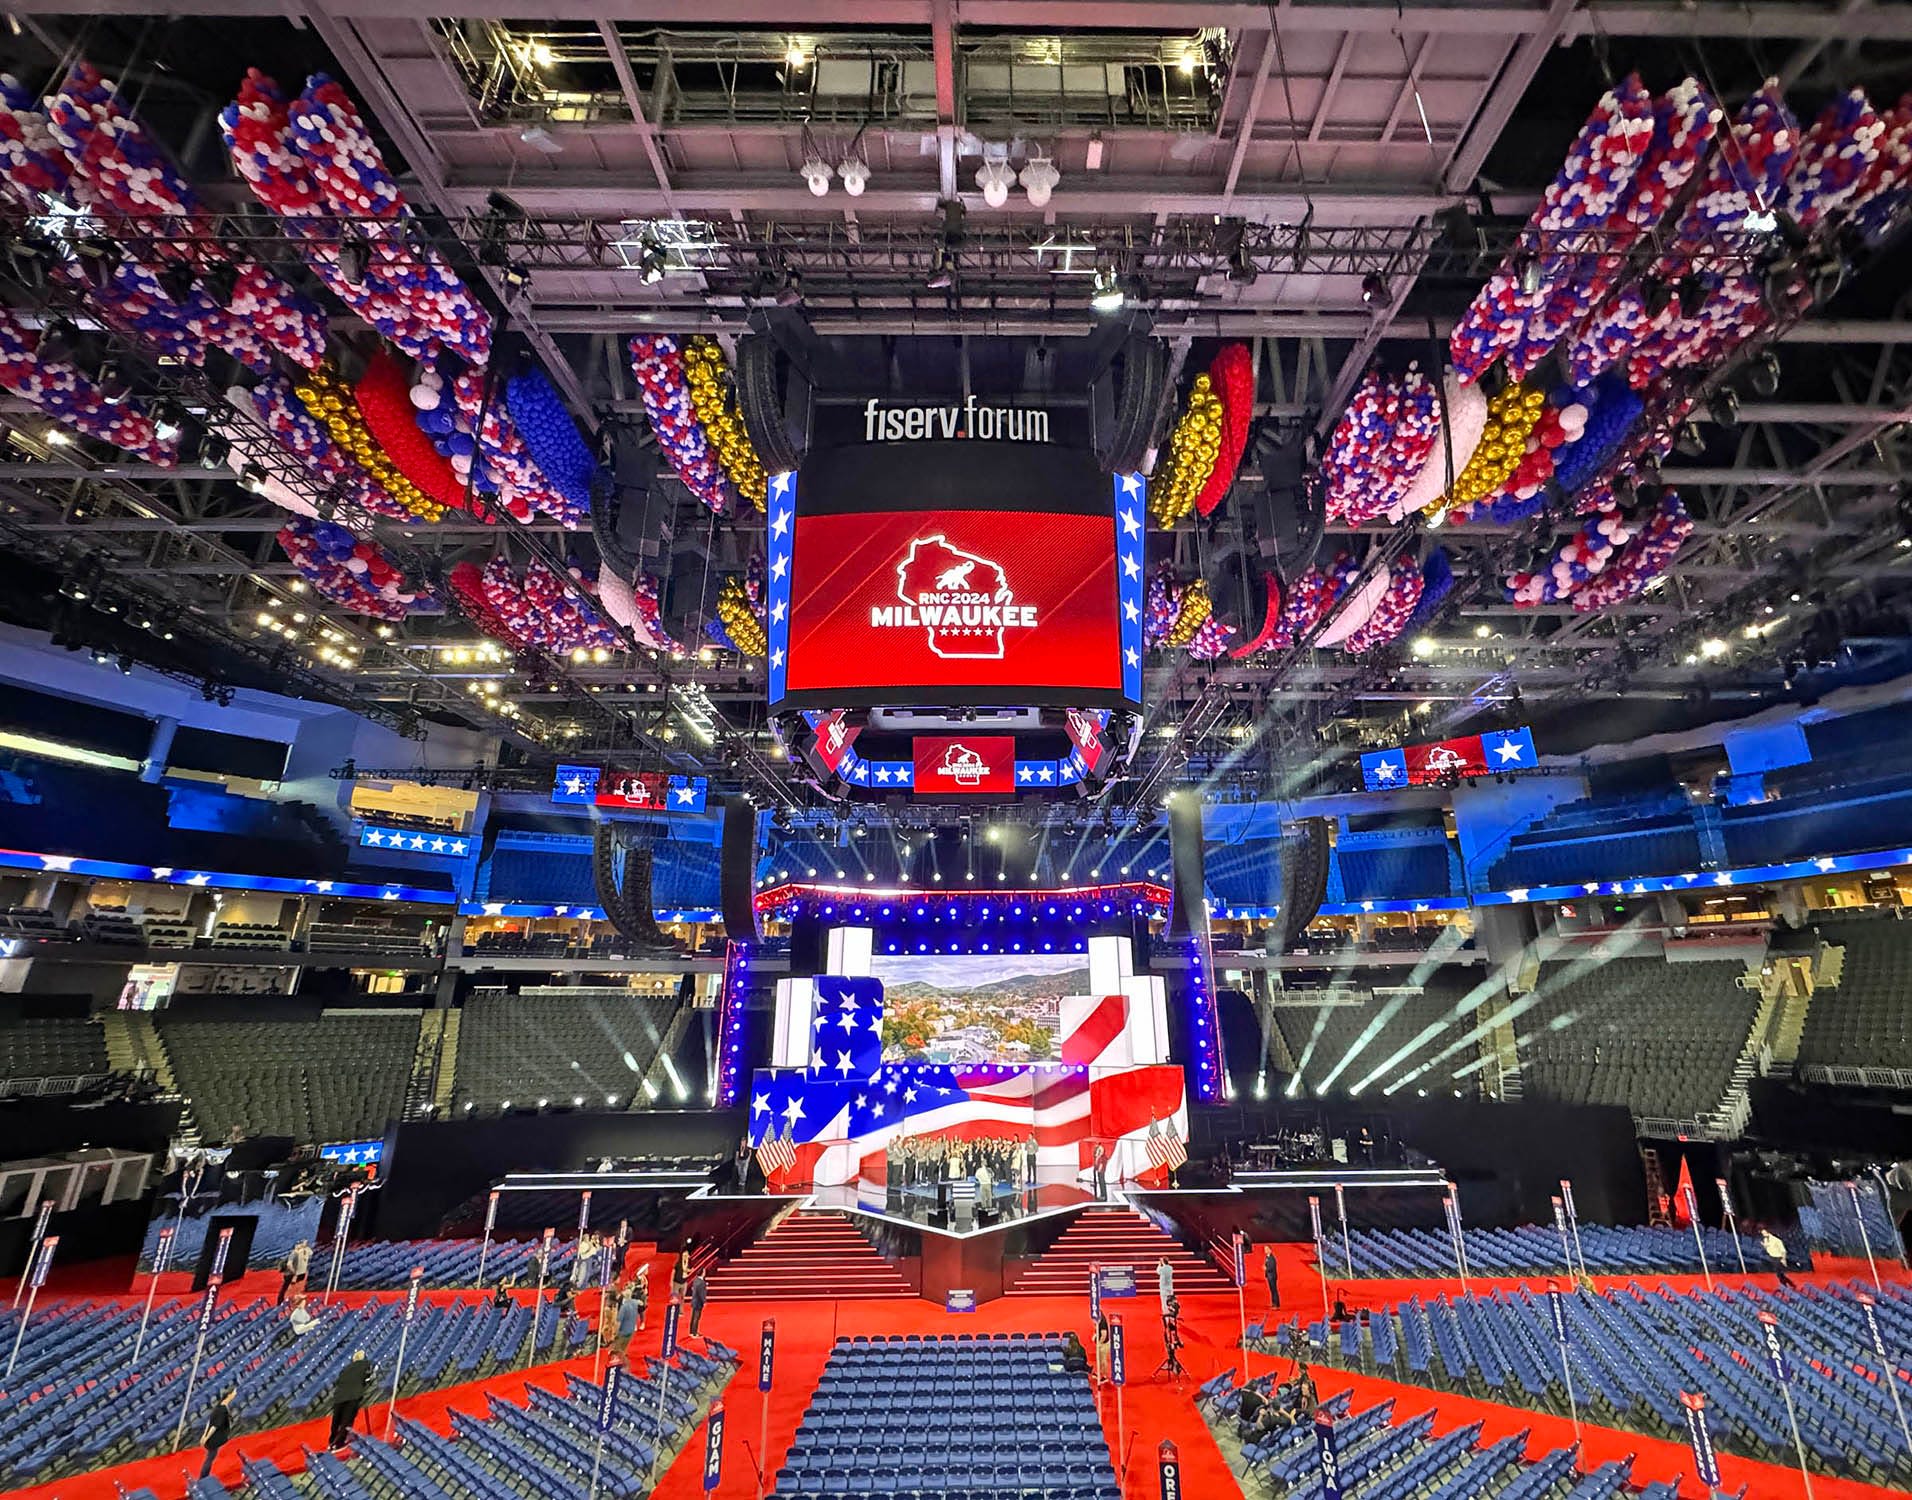 When is the RNC? When Republican National Conventions starts, when Trump will speak